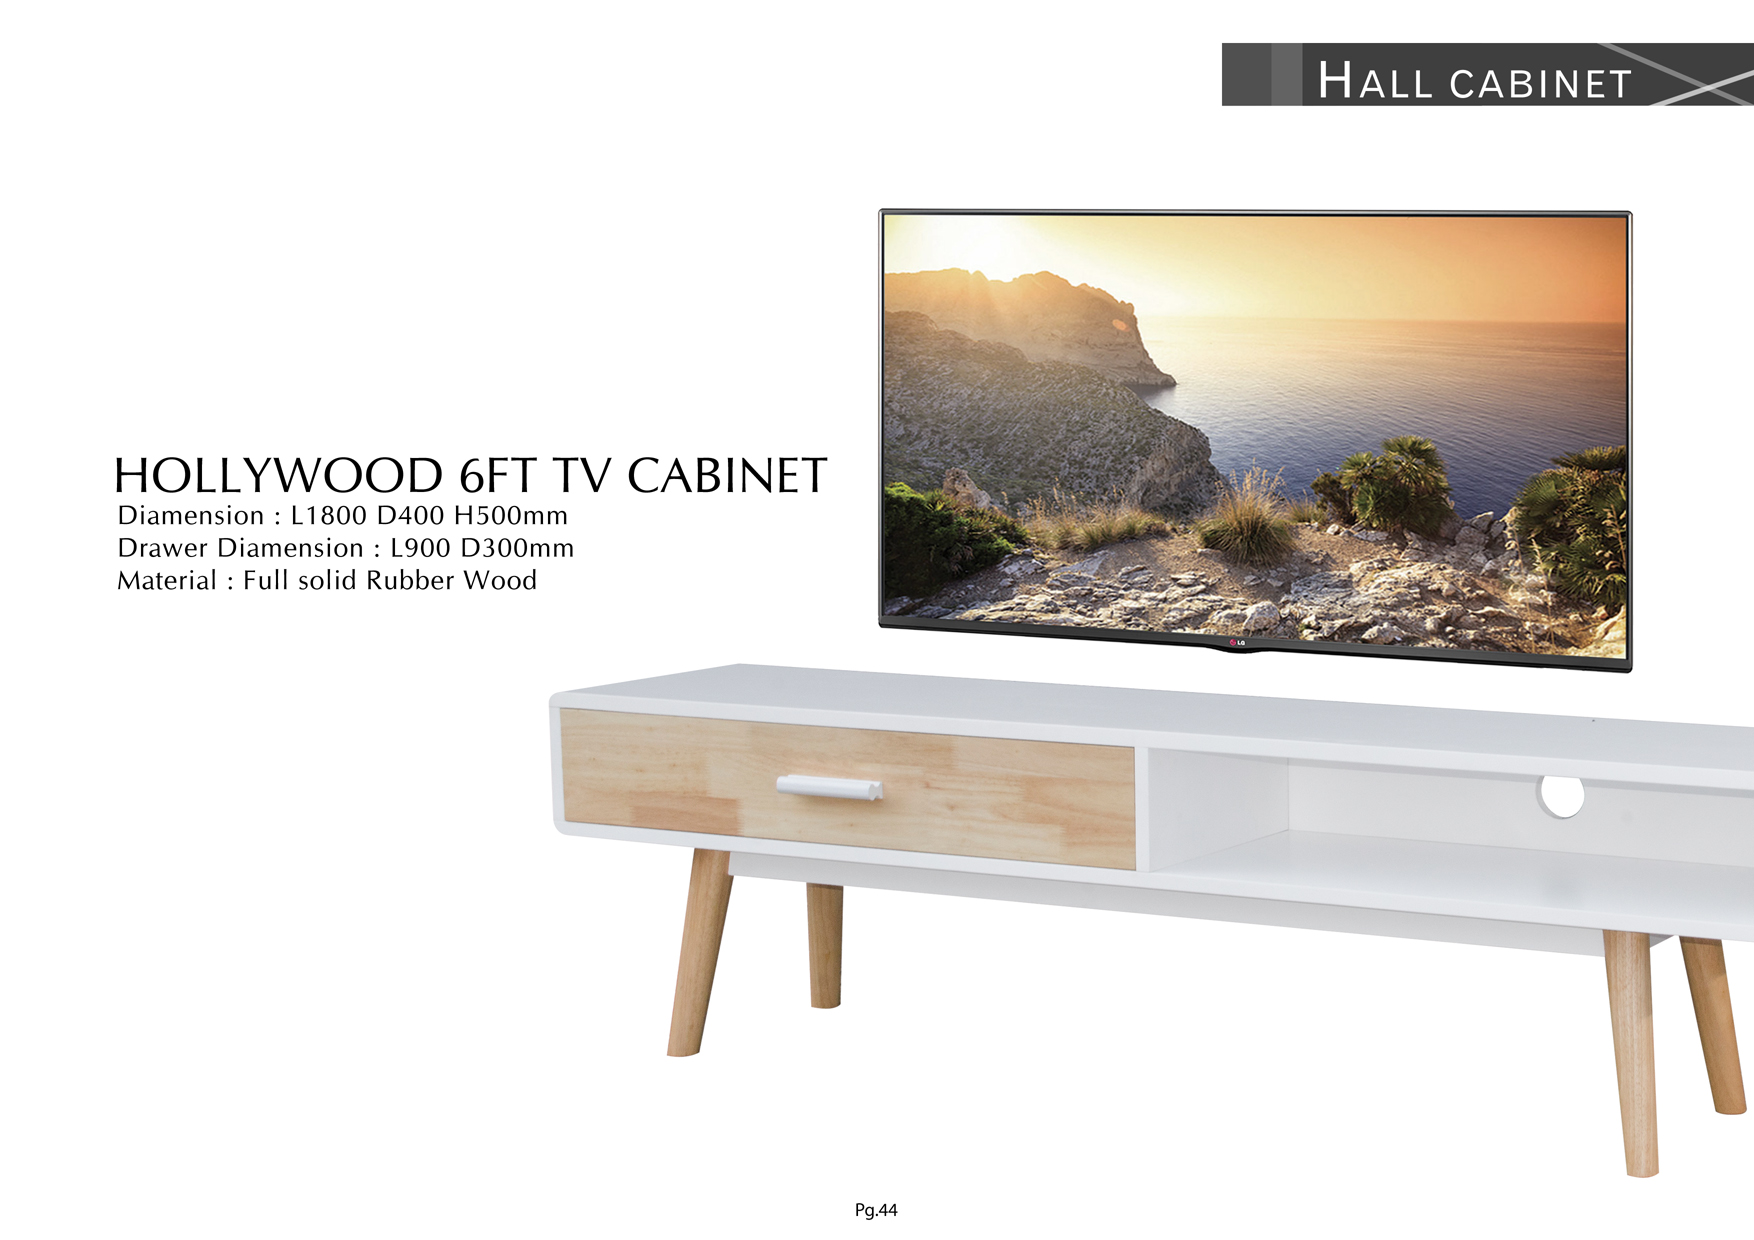 Product: PG44. HOLLYWOOD 6FT TV CABINET